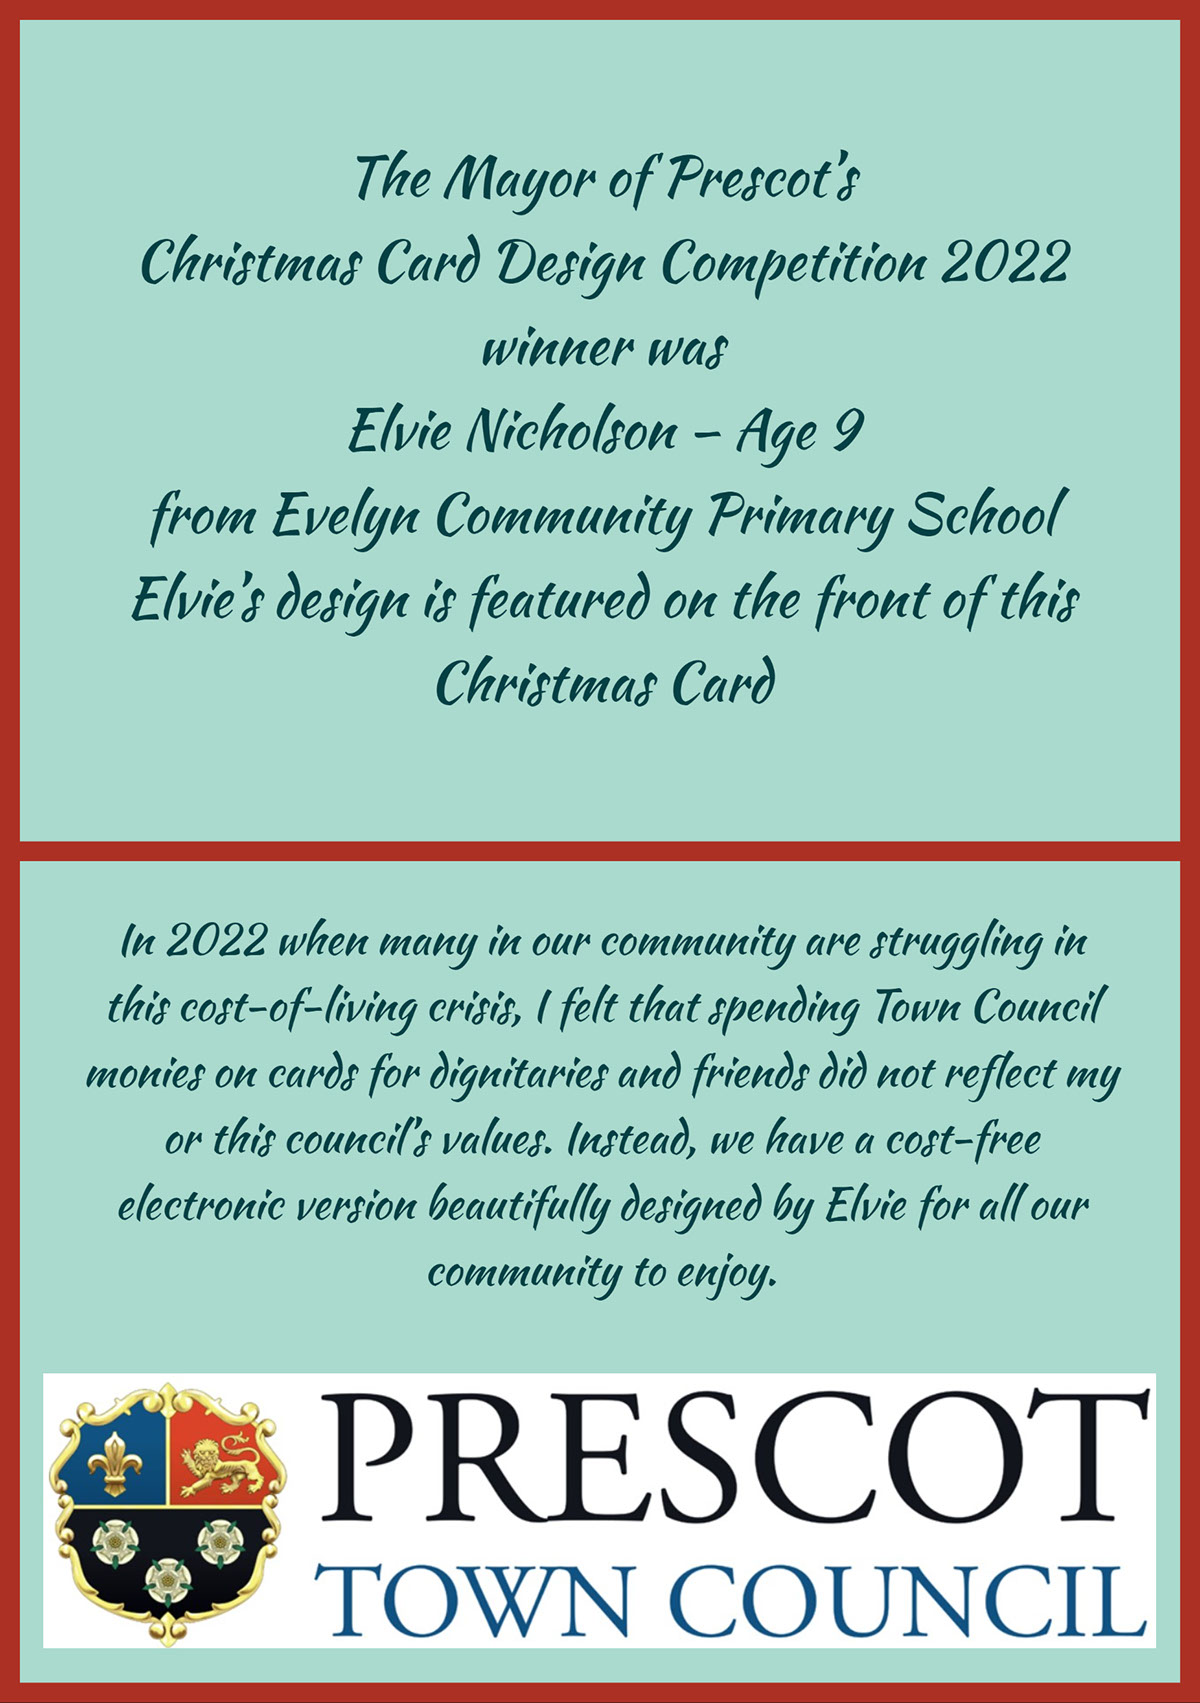 On behalf of Prescot Town Council we would like to wish you a very Merry Christmas and best wishes for the New Year from The Mayor of Prescot Cllr Joanne Burke On behalf of Prescot Town Council we would like to wish you a very Merry Christmas and best wishes for the New Year from The Mayor of Prescot Cllr Joanne Burke